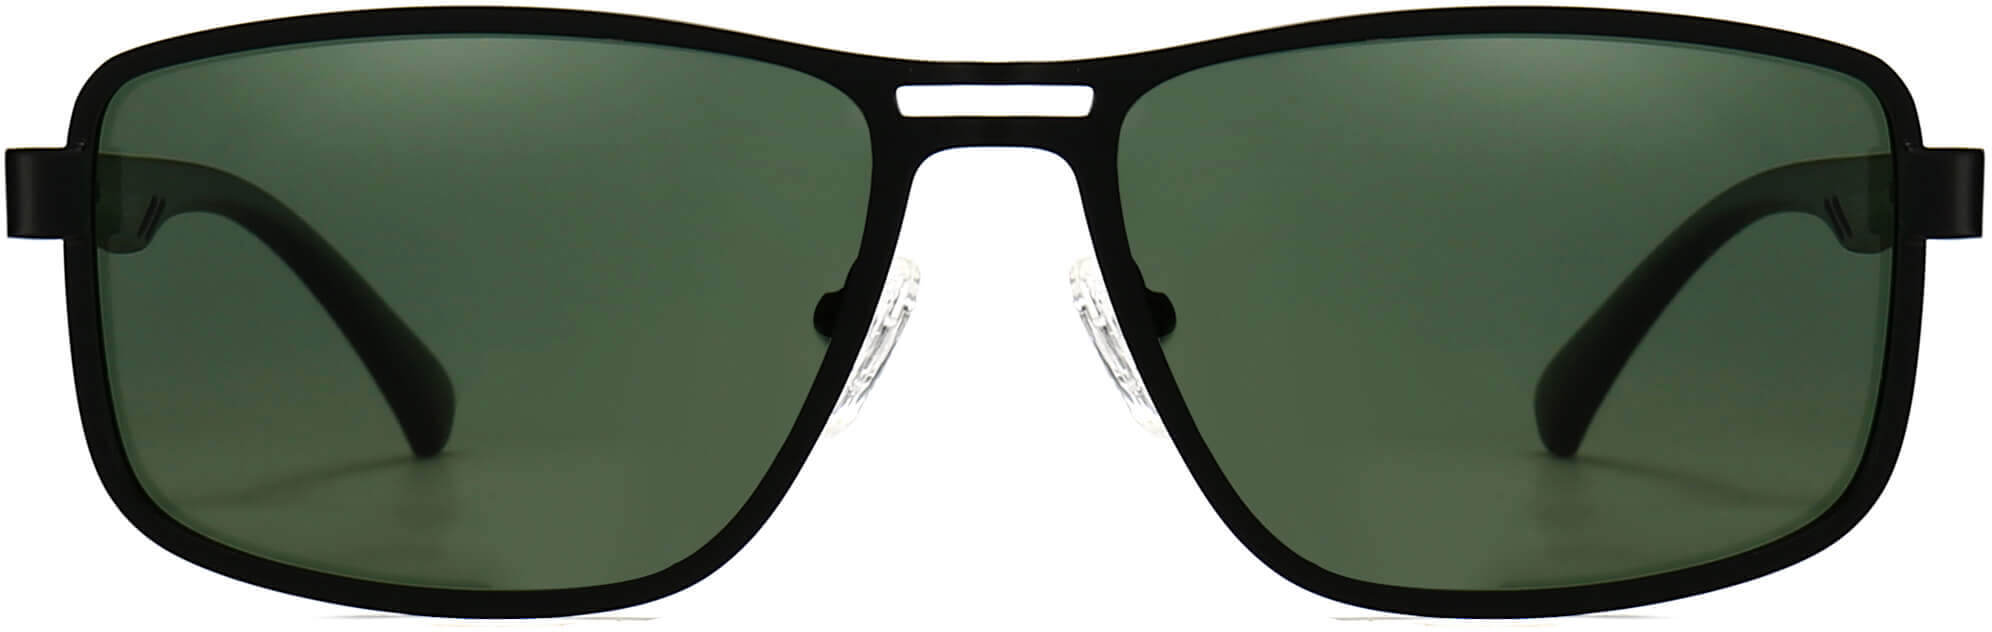 Adeline Black Stainless steel Sunglasses from ANRRI, front view